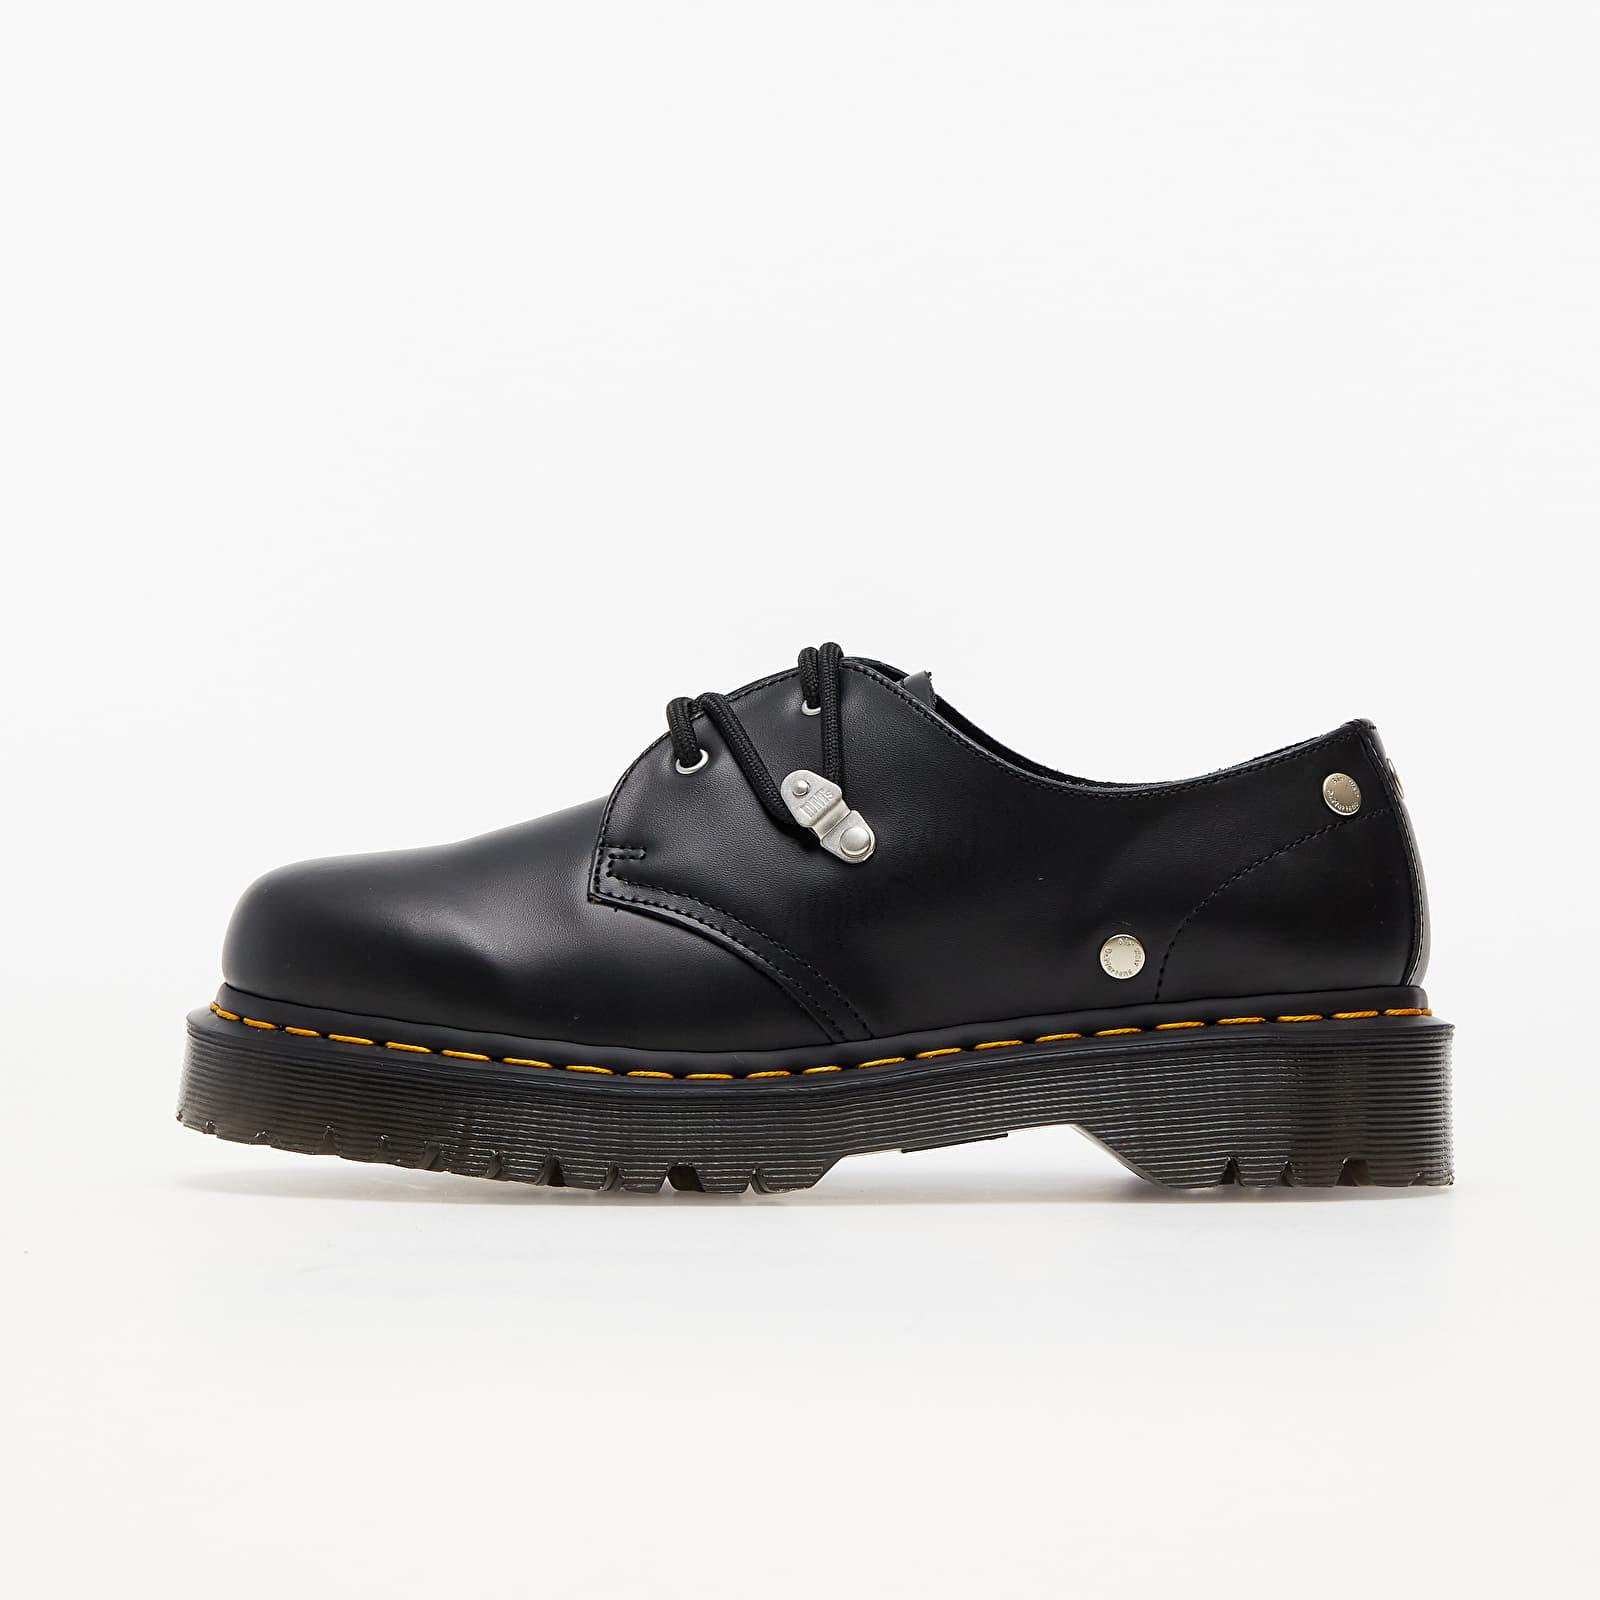 Dr. Martens 1461 Bex Stud Black Fine Haircell | Lyst